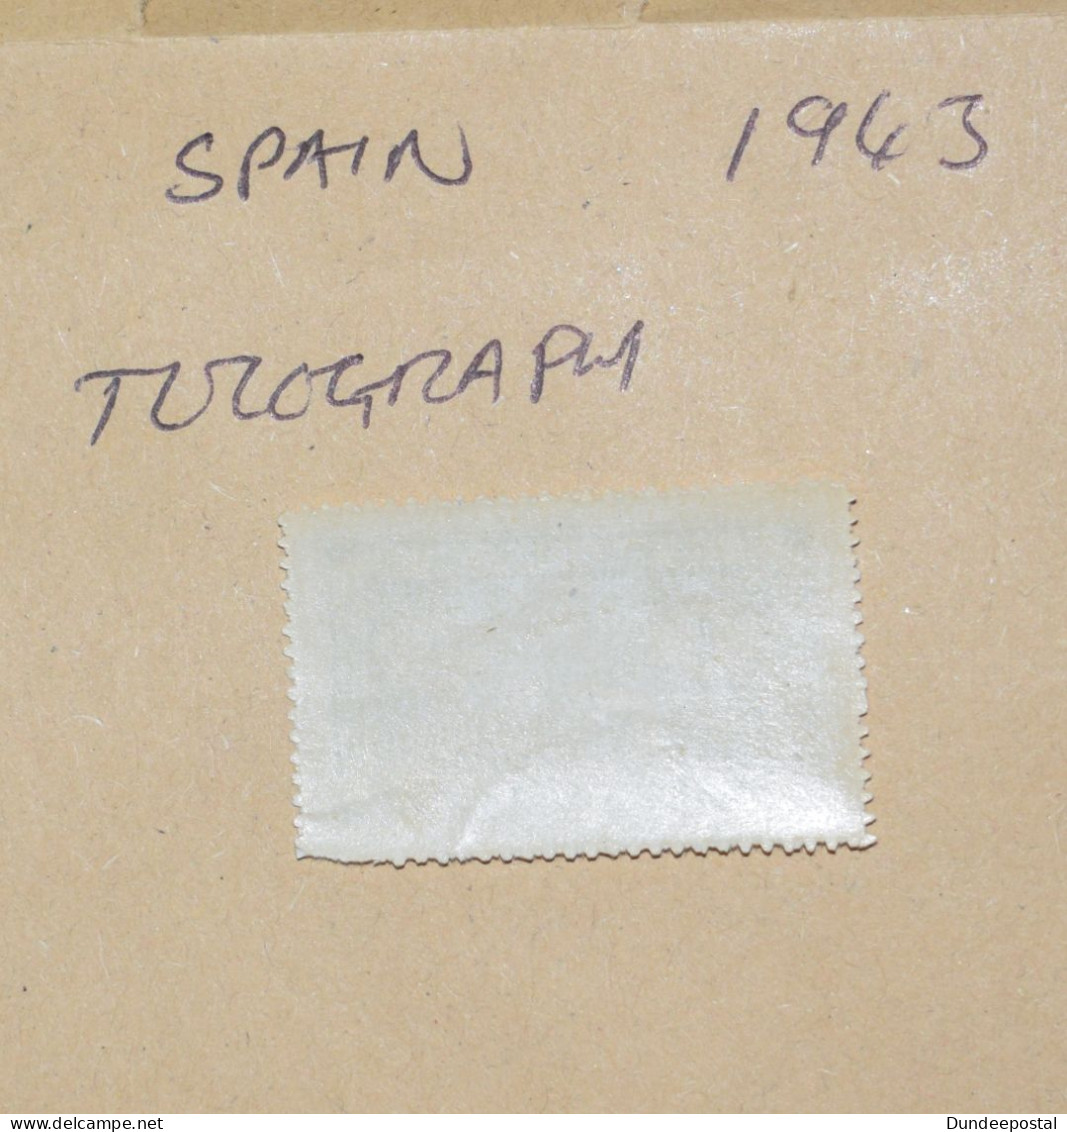 SPAIN  STAMPS  Telegraph 1943 ~~L@@K~~ - Used Stamps